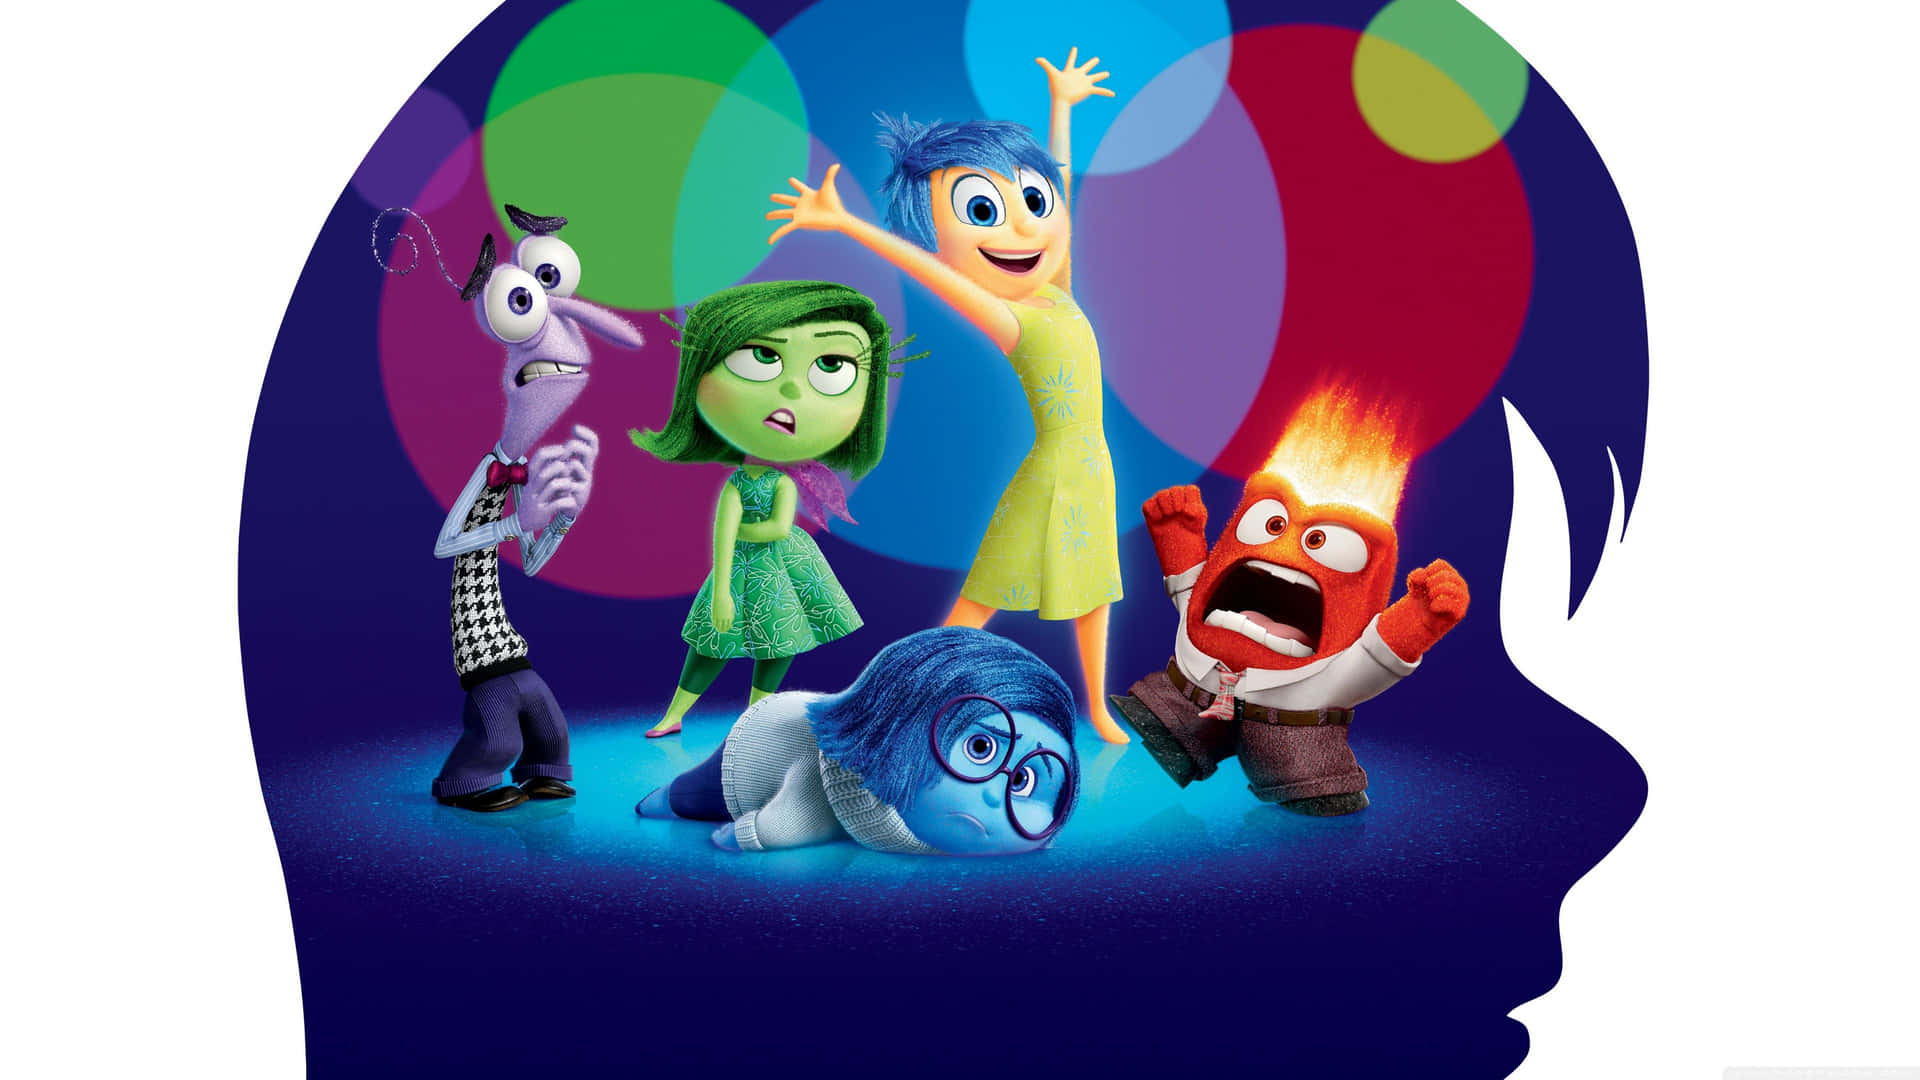 Joy, Sadness, and Disgust from Disney Pixar's 'Inside Out'